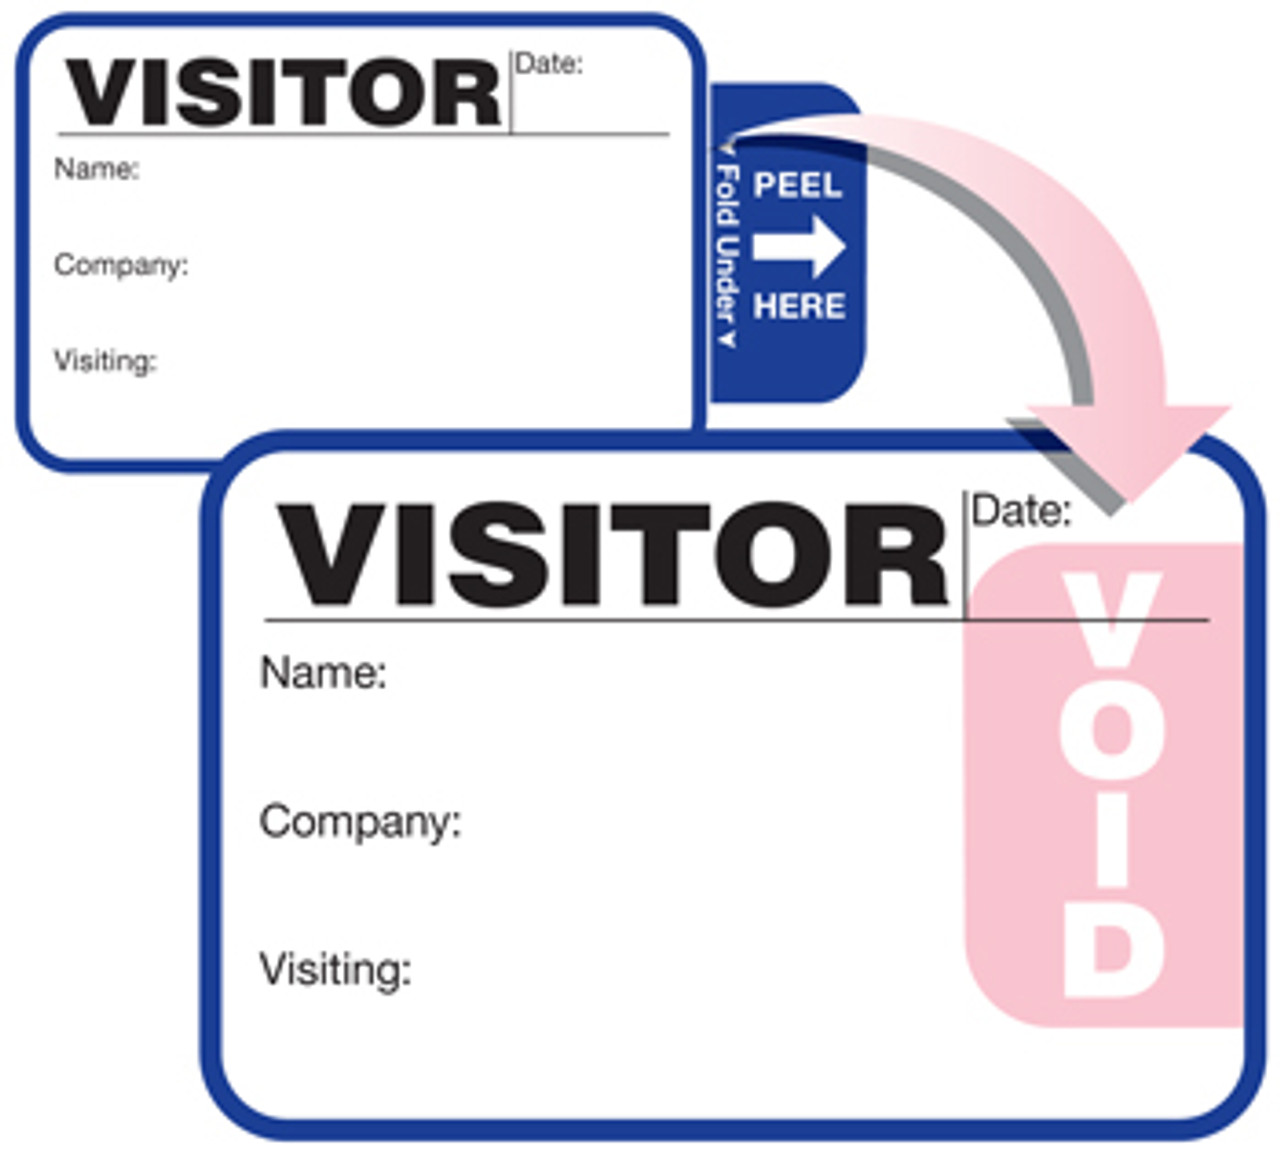 VisitorPass 3" x 2" TAB Expiring Direct Thermal Name Badges (VDTT3)